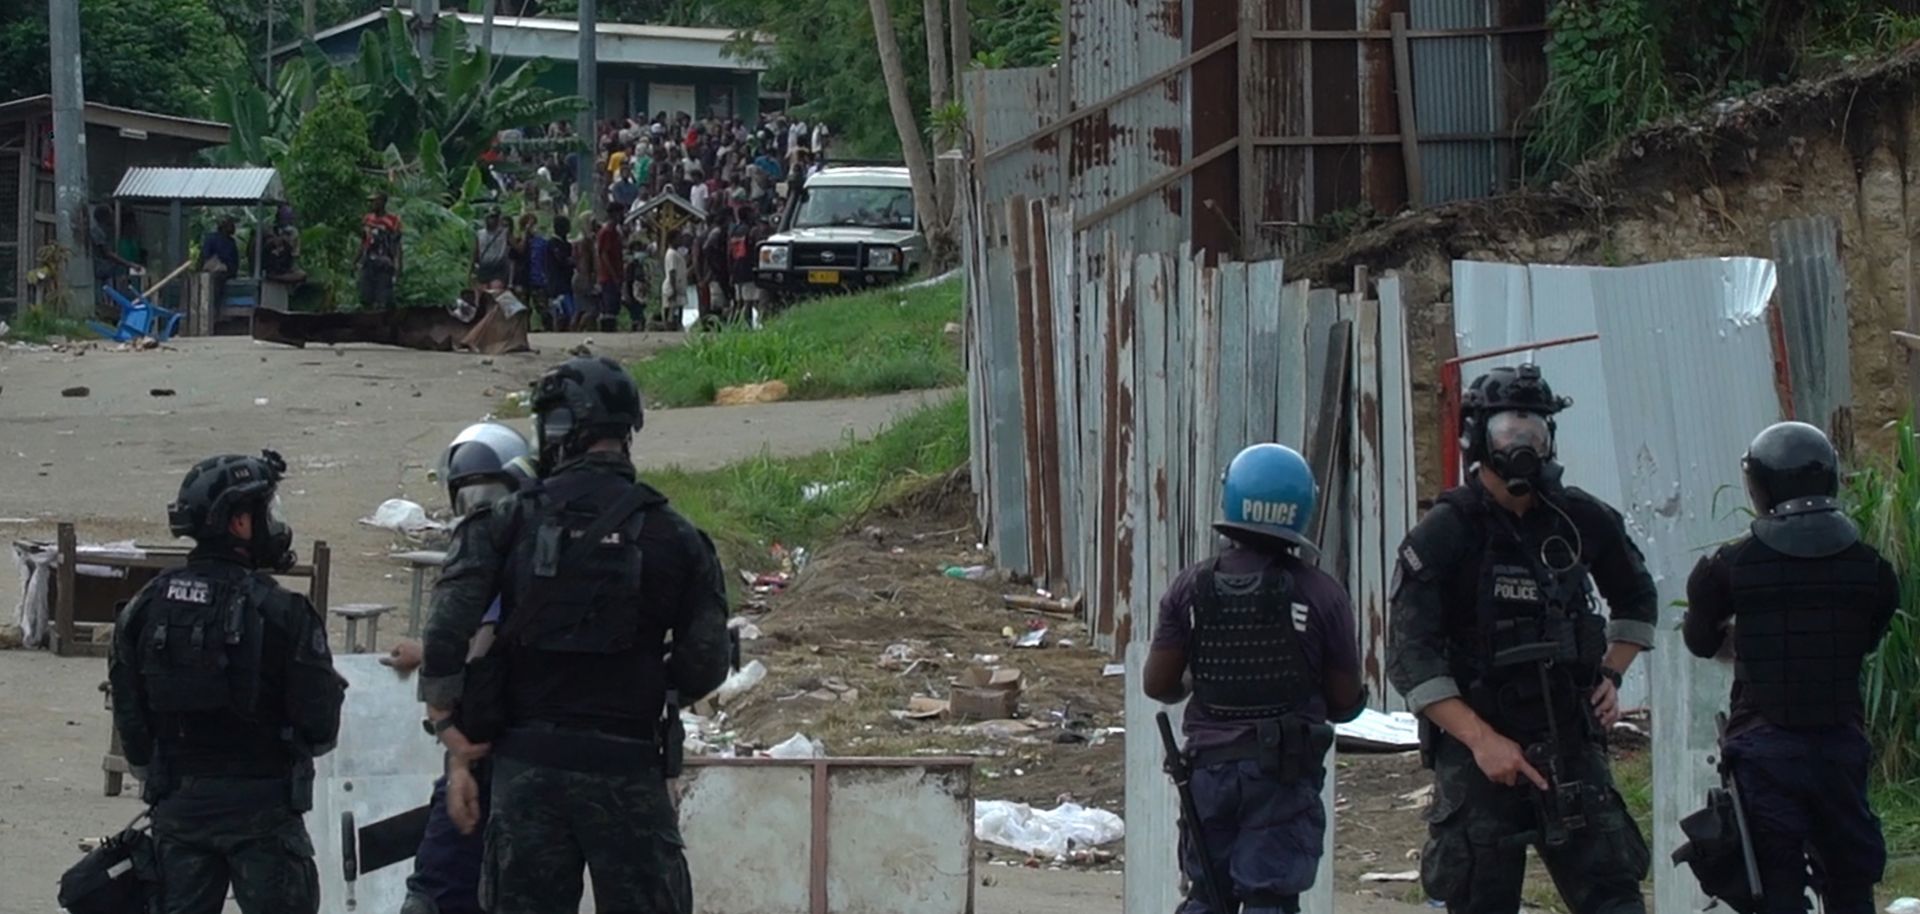 A frame grab from video footage shows Australian Federal Police officers and local police monitoring a crowd in Honiara, the capital of the Solomon Islands, on Nov. 26, 2021. 